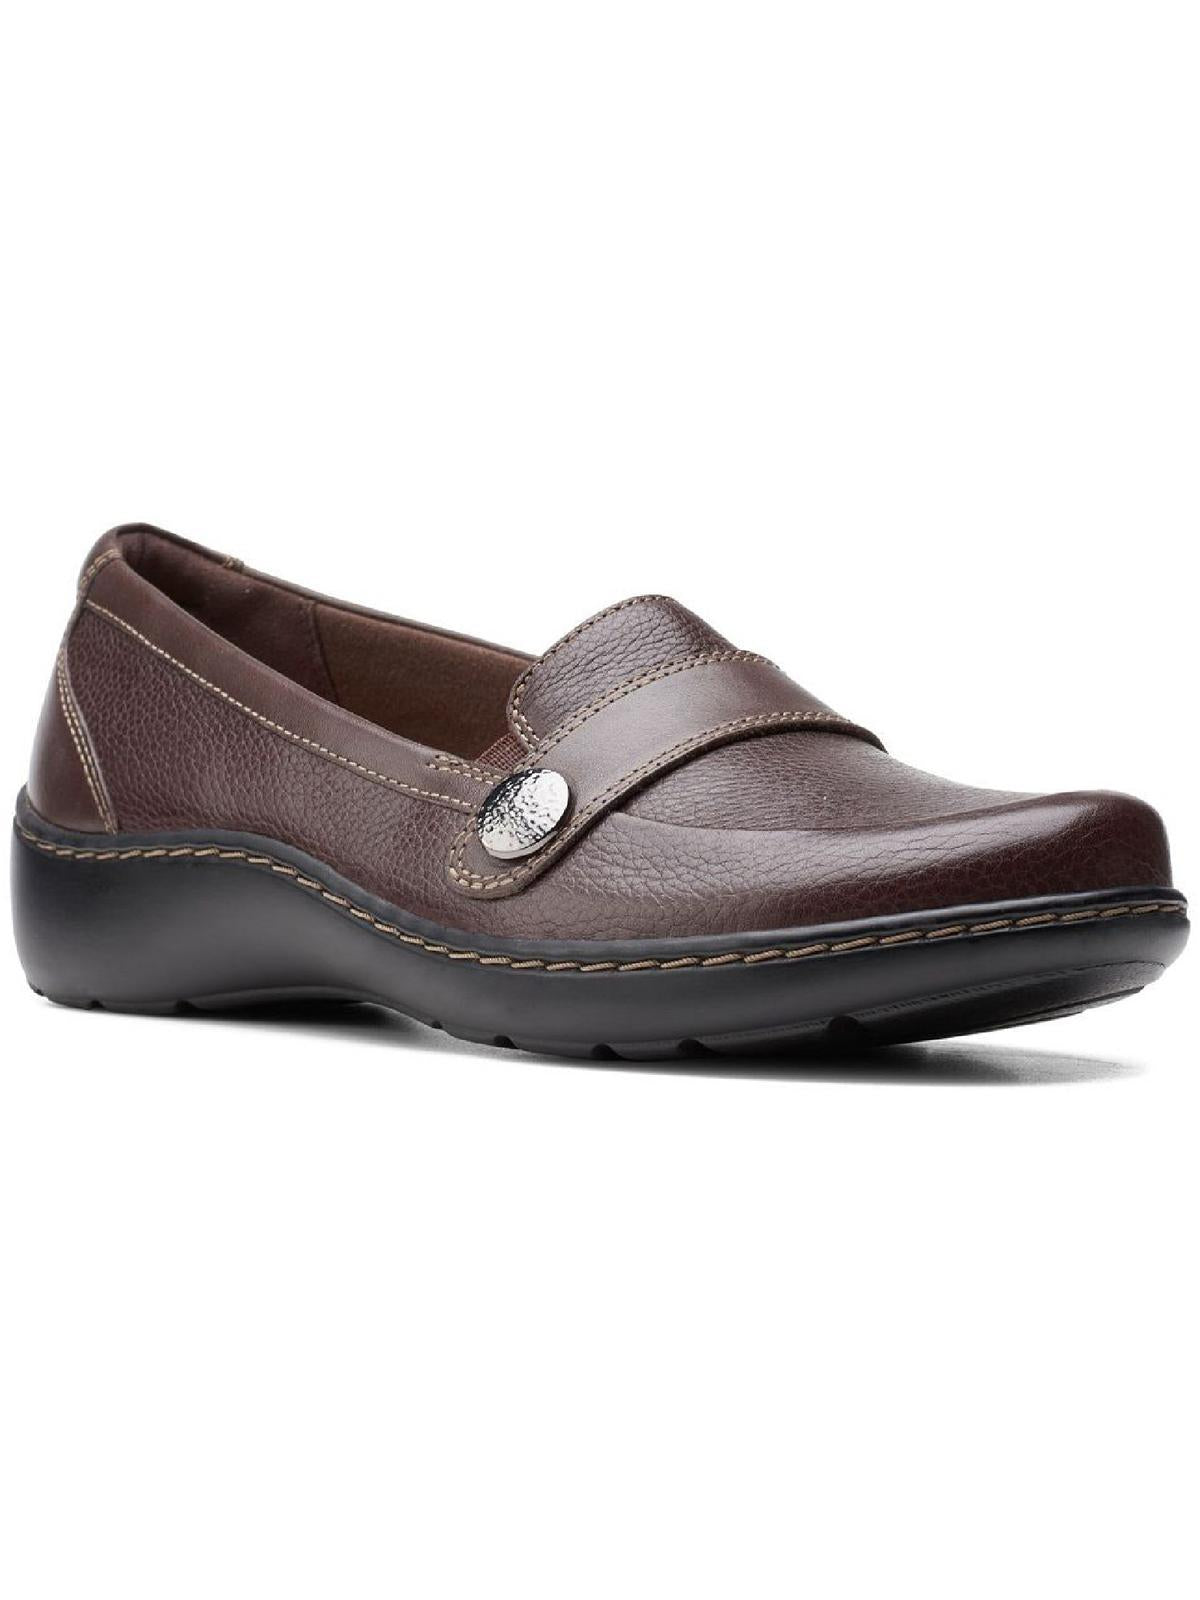 Clarks Cora Daisy Womens Padded Insole Slip On Loafers US 9.5 female